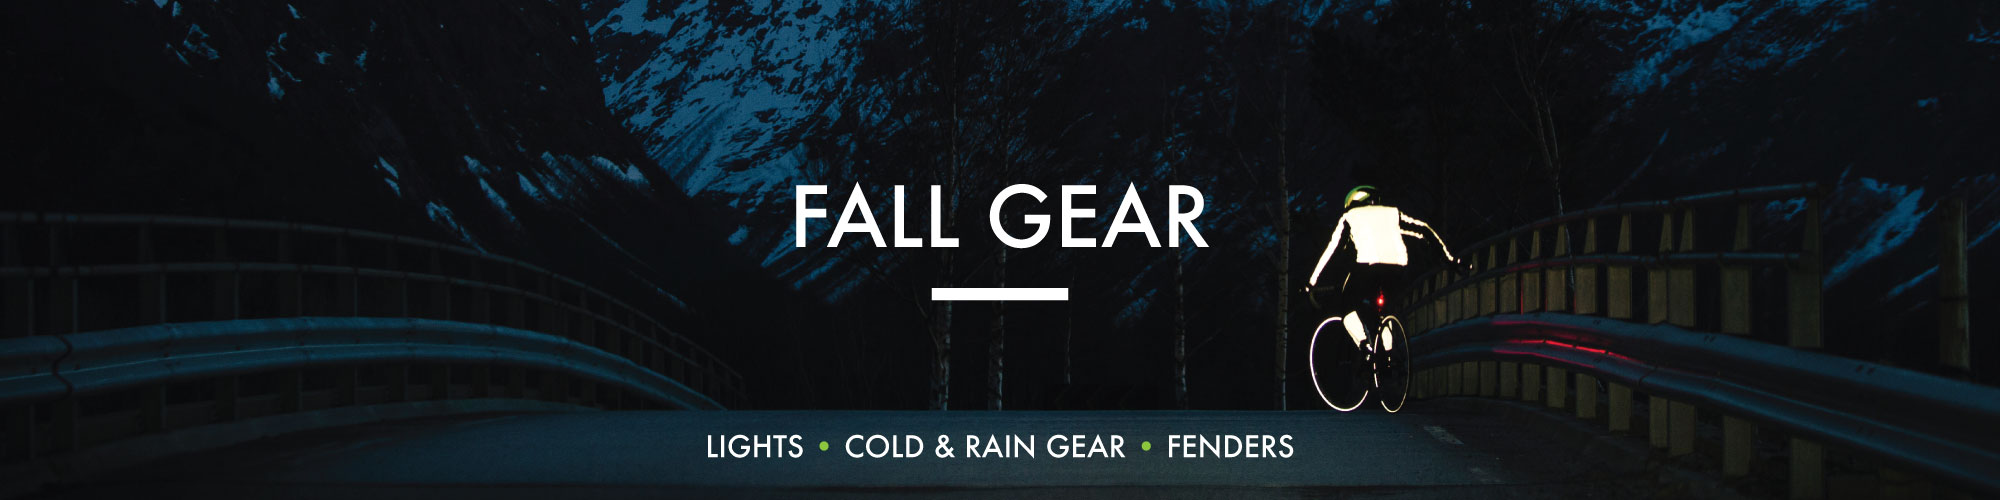 Grab all your essential cycling gear and accessories for the Fall and Winter